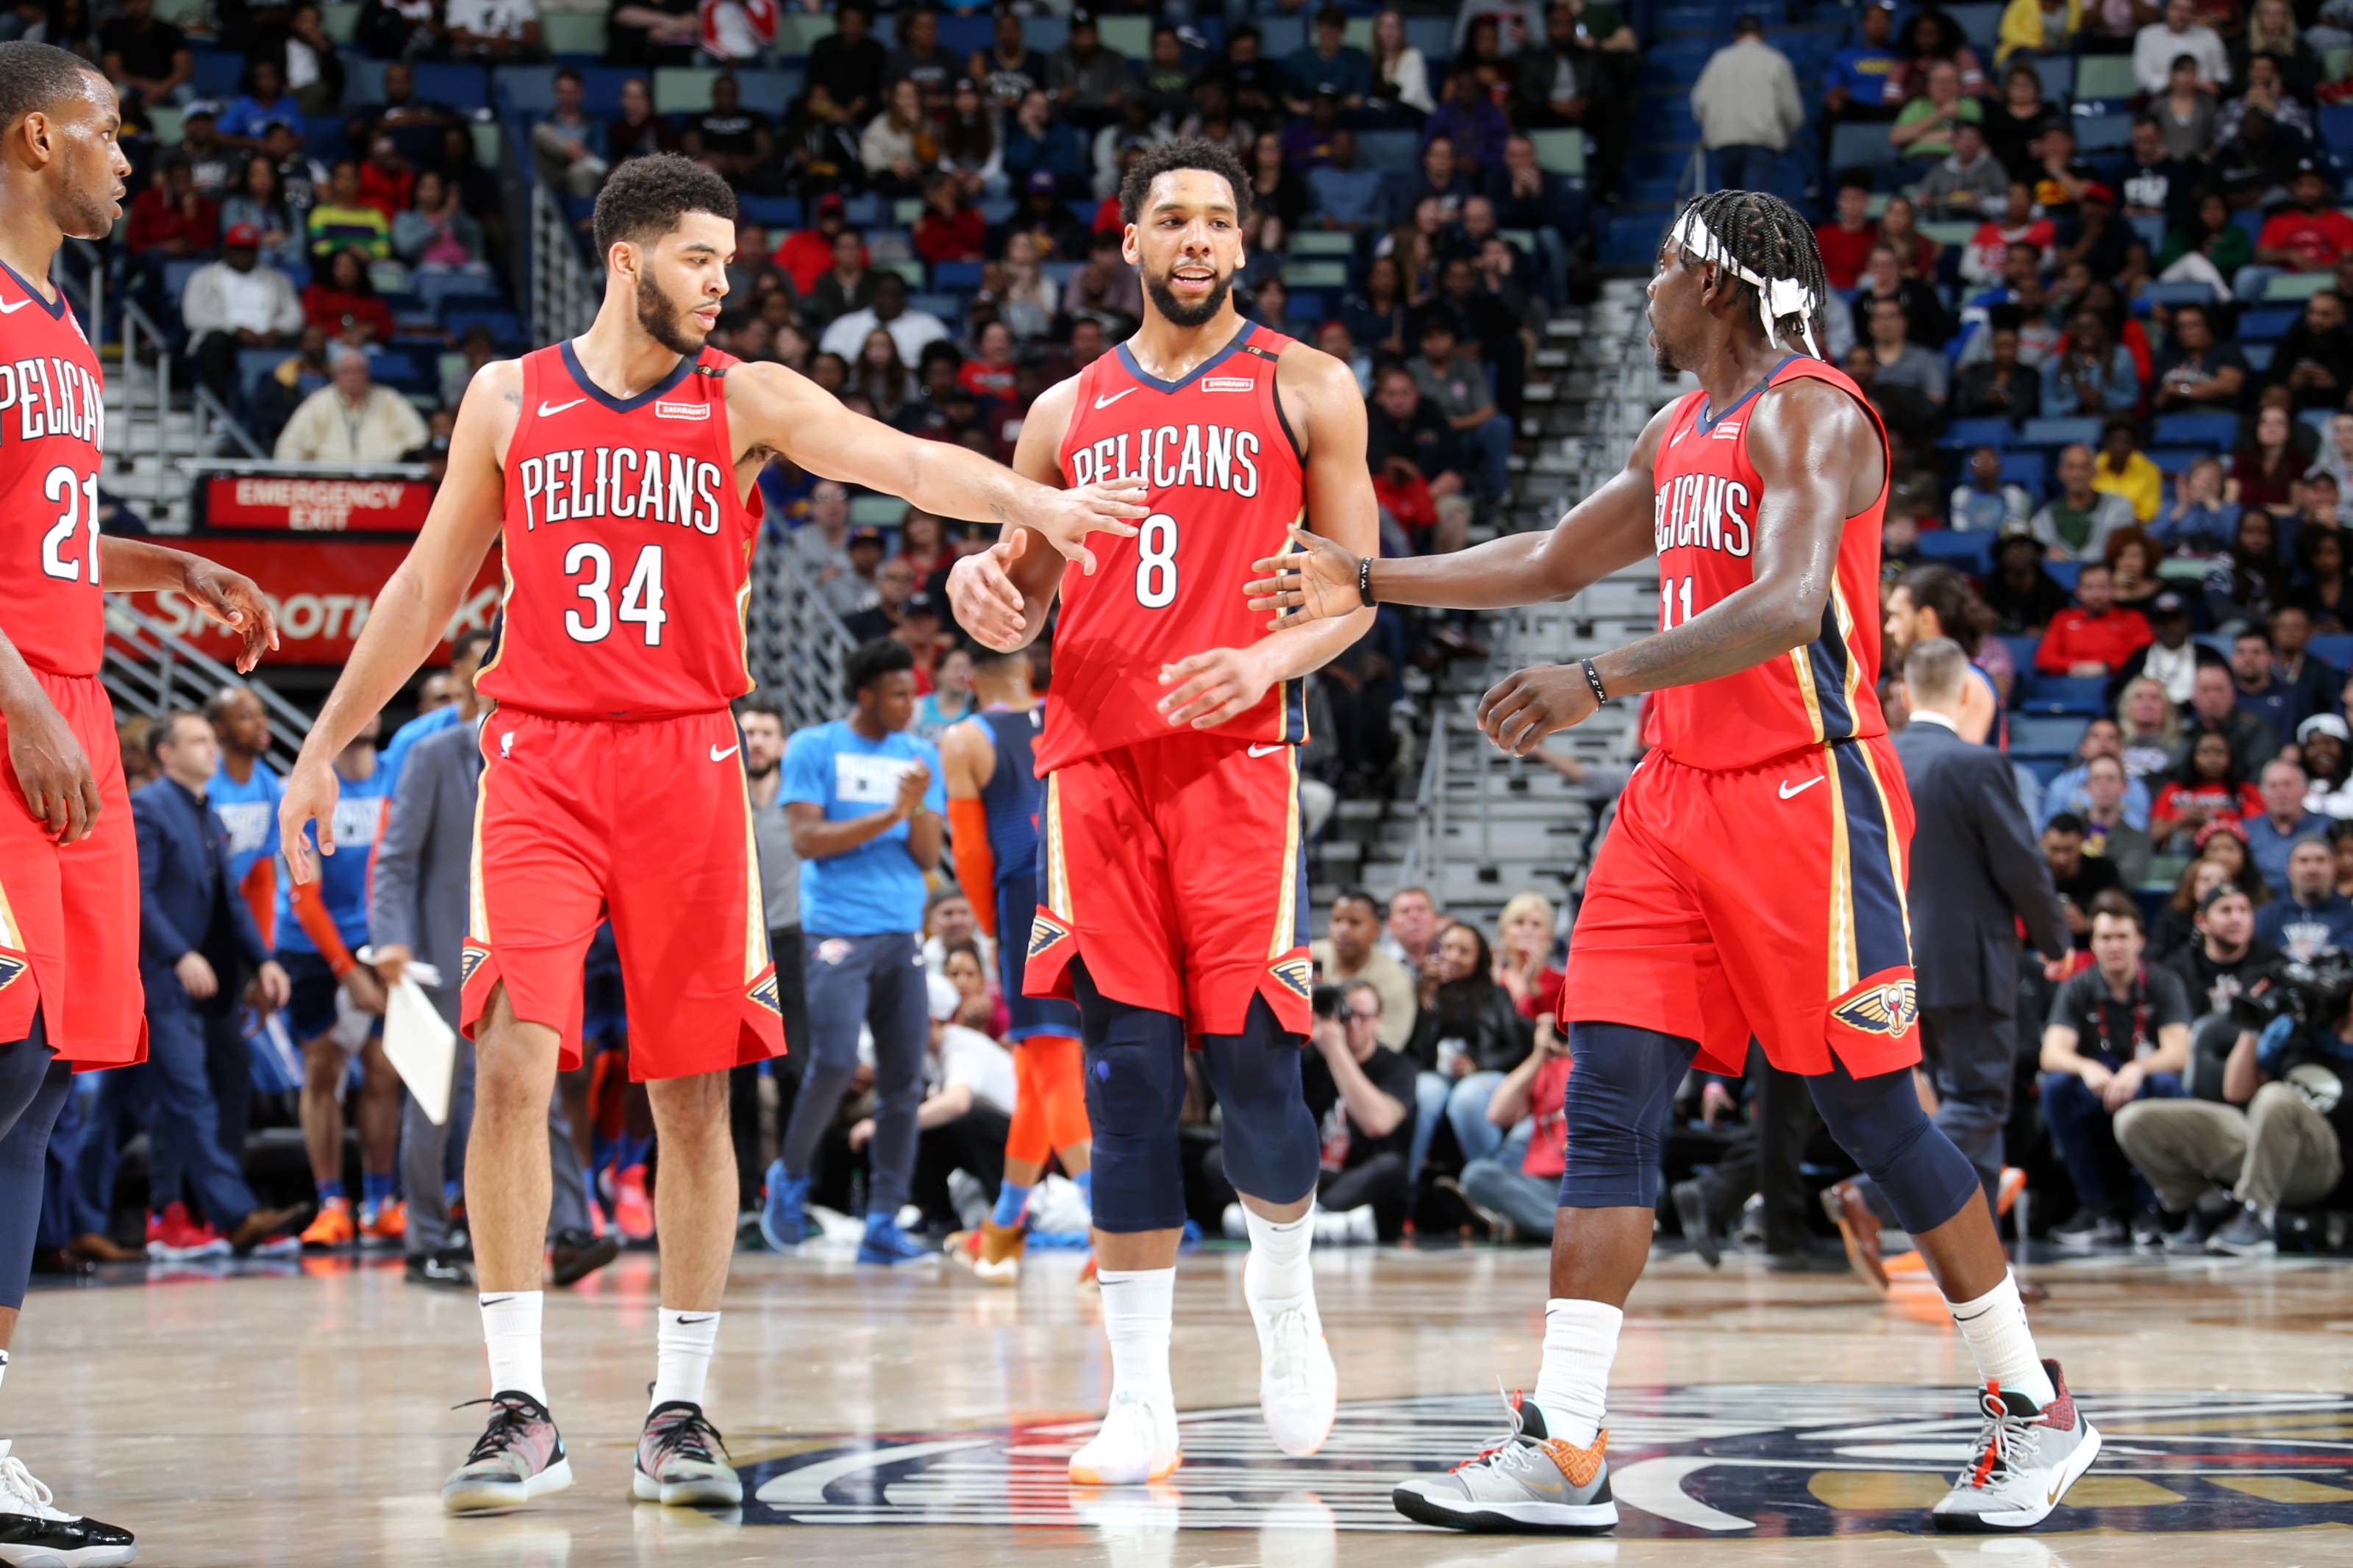 Bigger, bolder look to the Mardi - New Orleans Pelicans